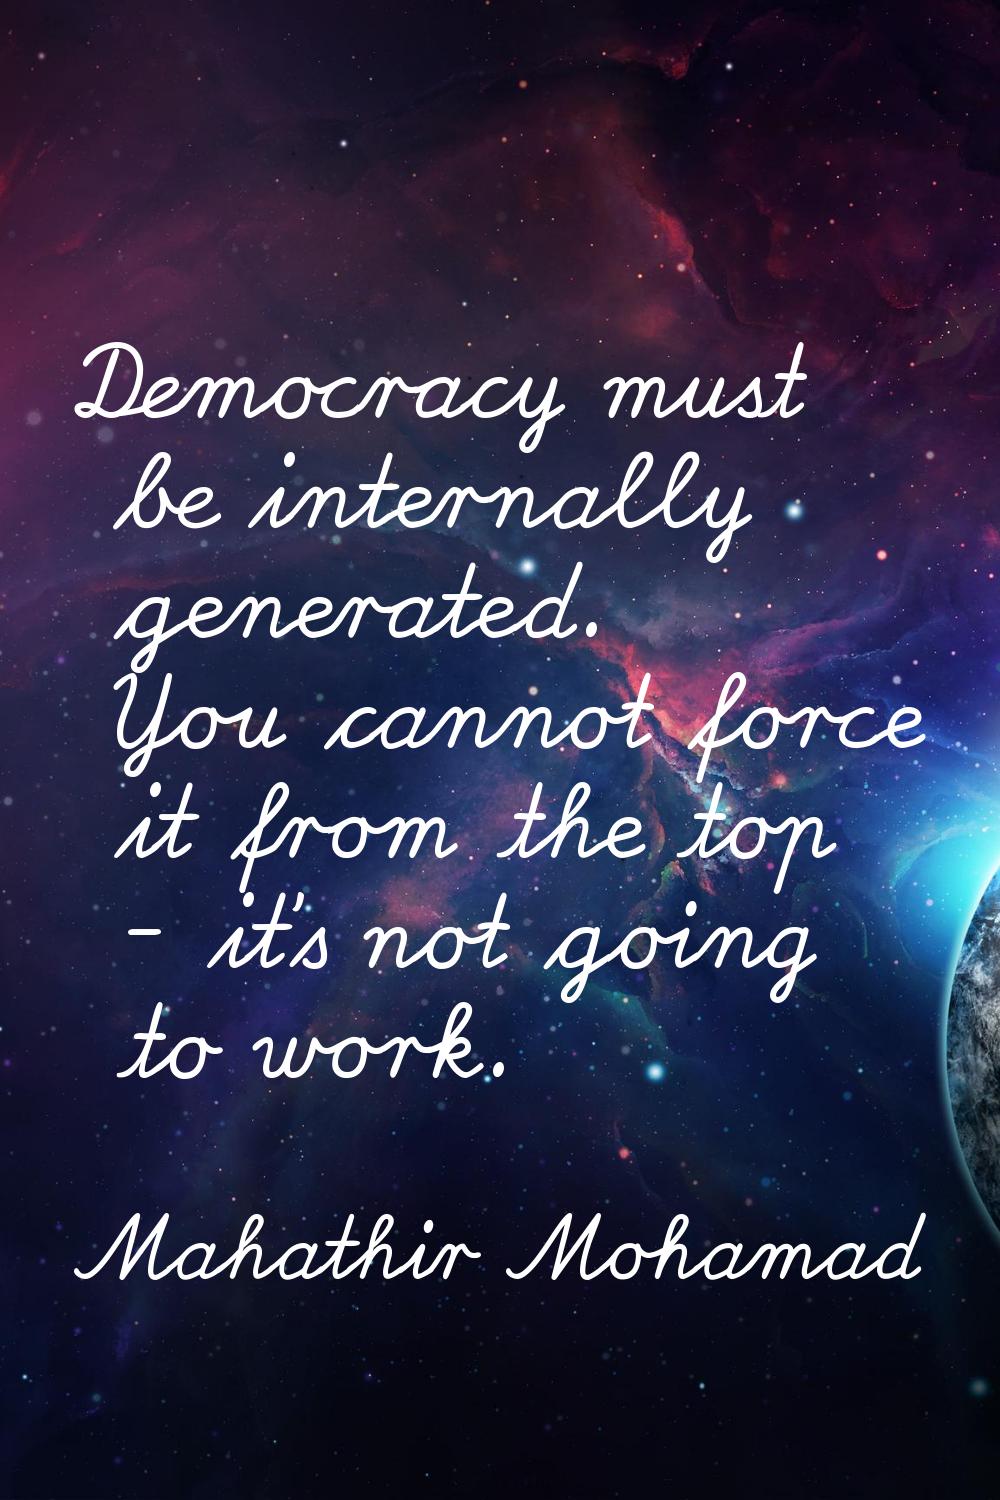 Democracy must be internally generated. You cannot force it from the top - it's not going to work.